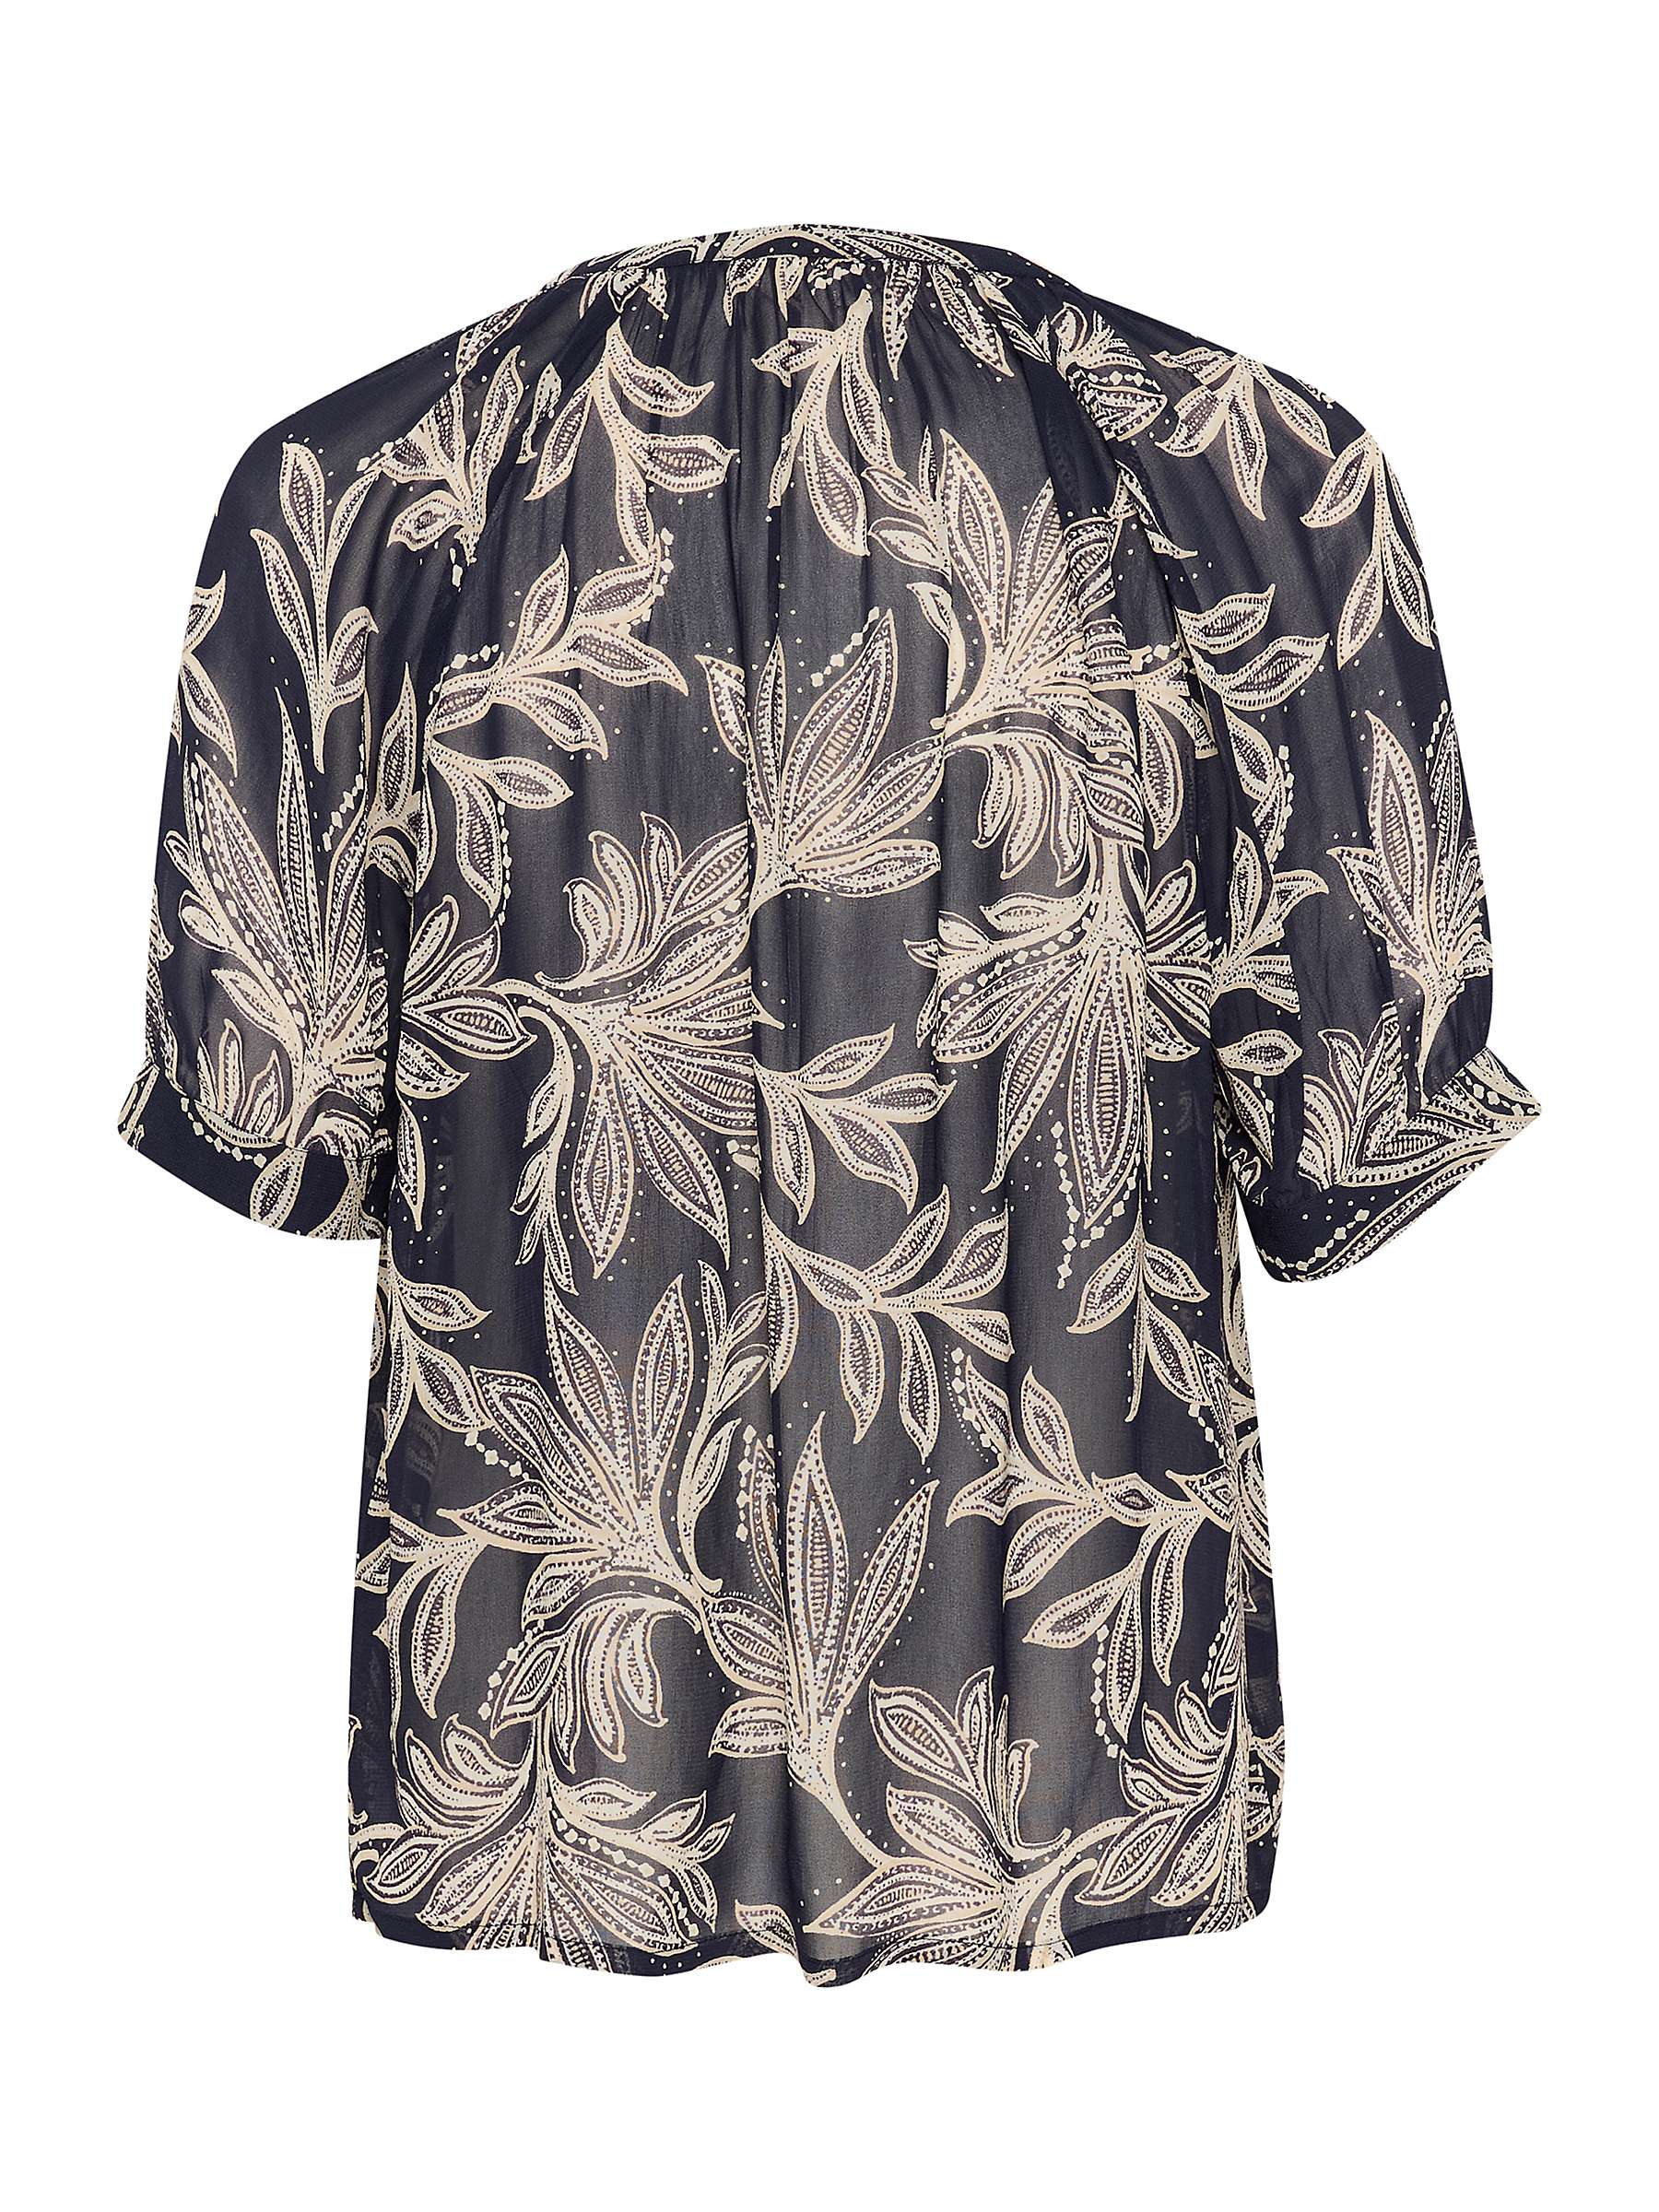 Buy Part Two Popsy Leaf Print Chiffon Blouse Online at johnlewis.com